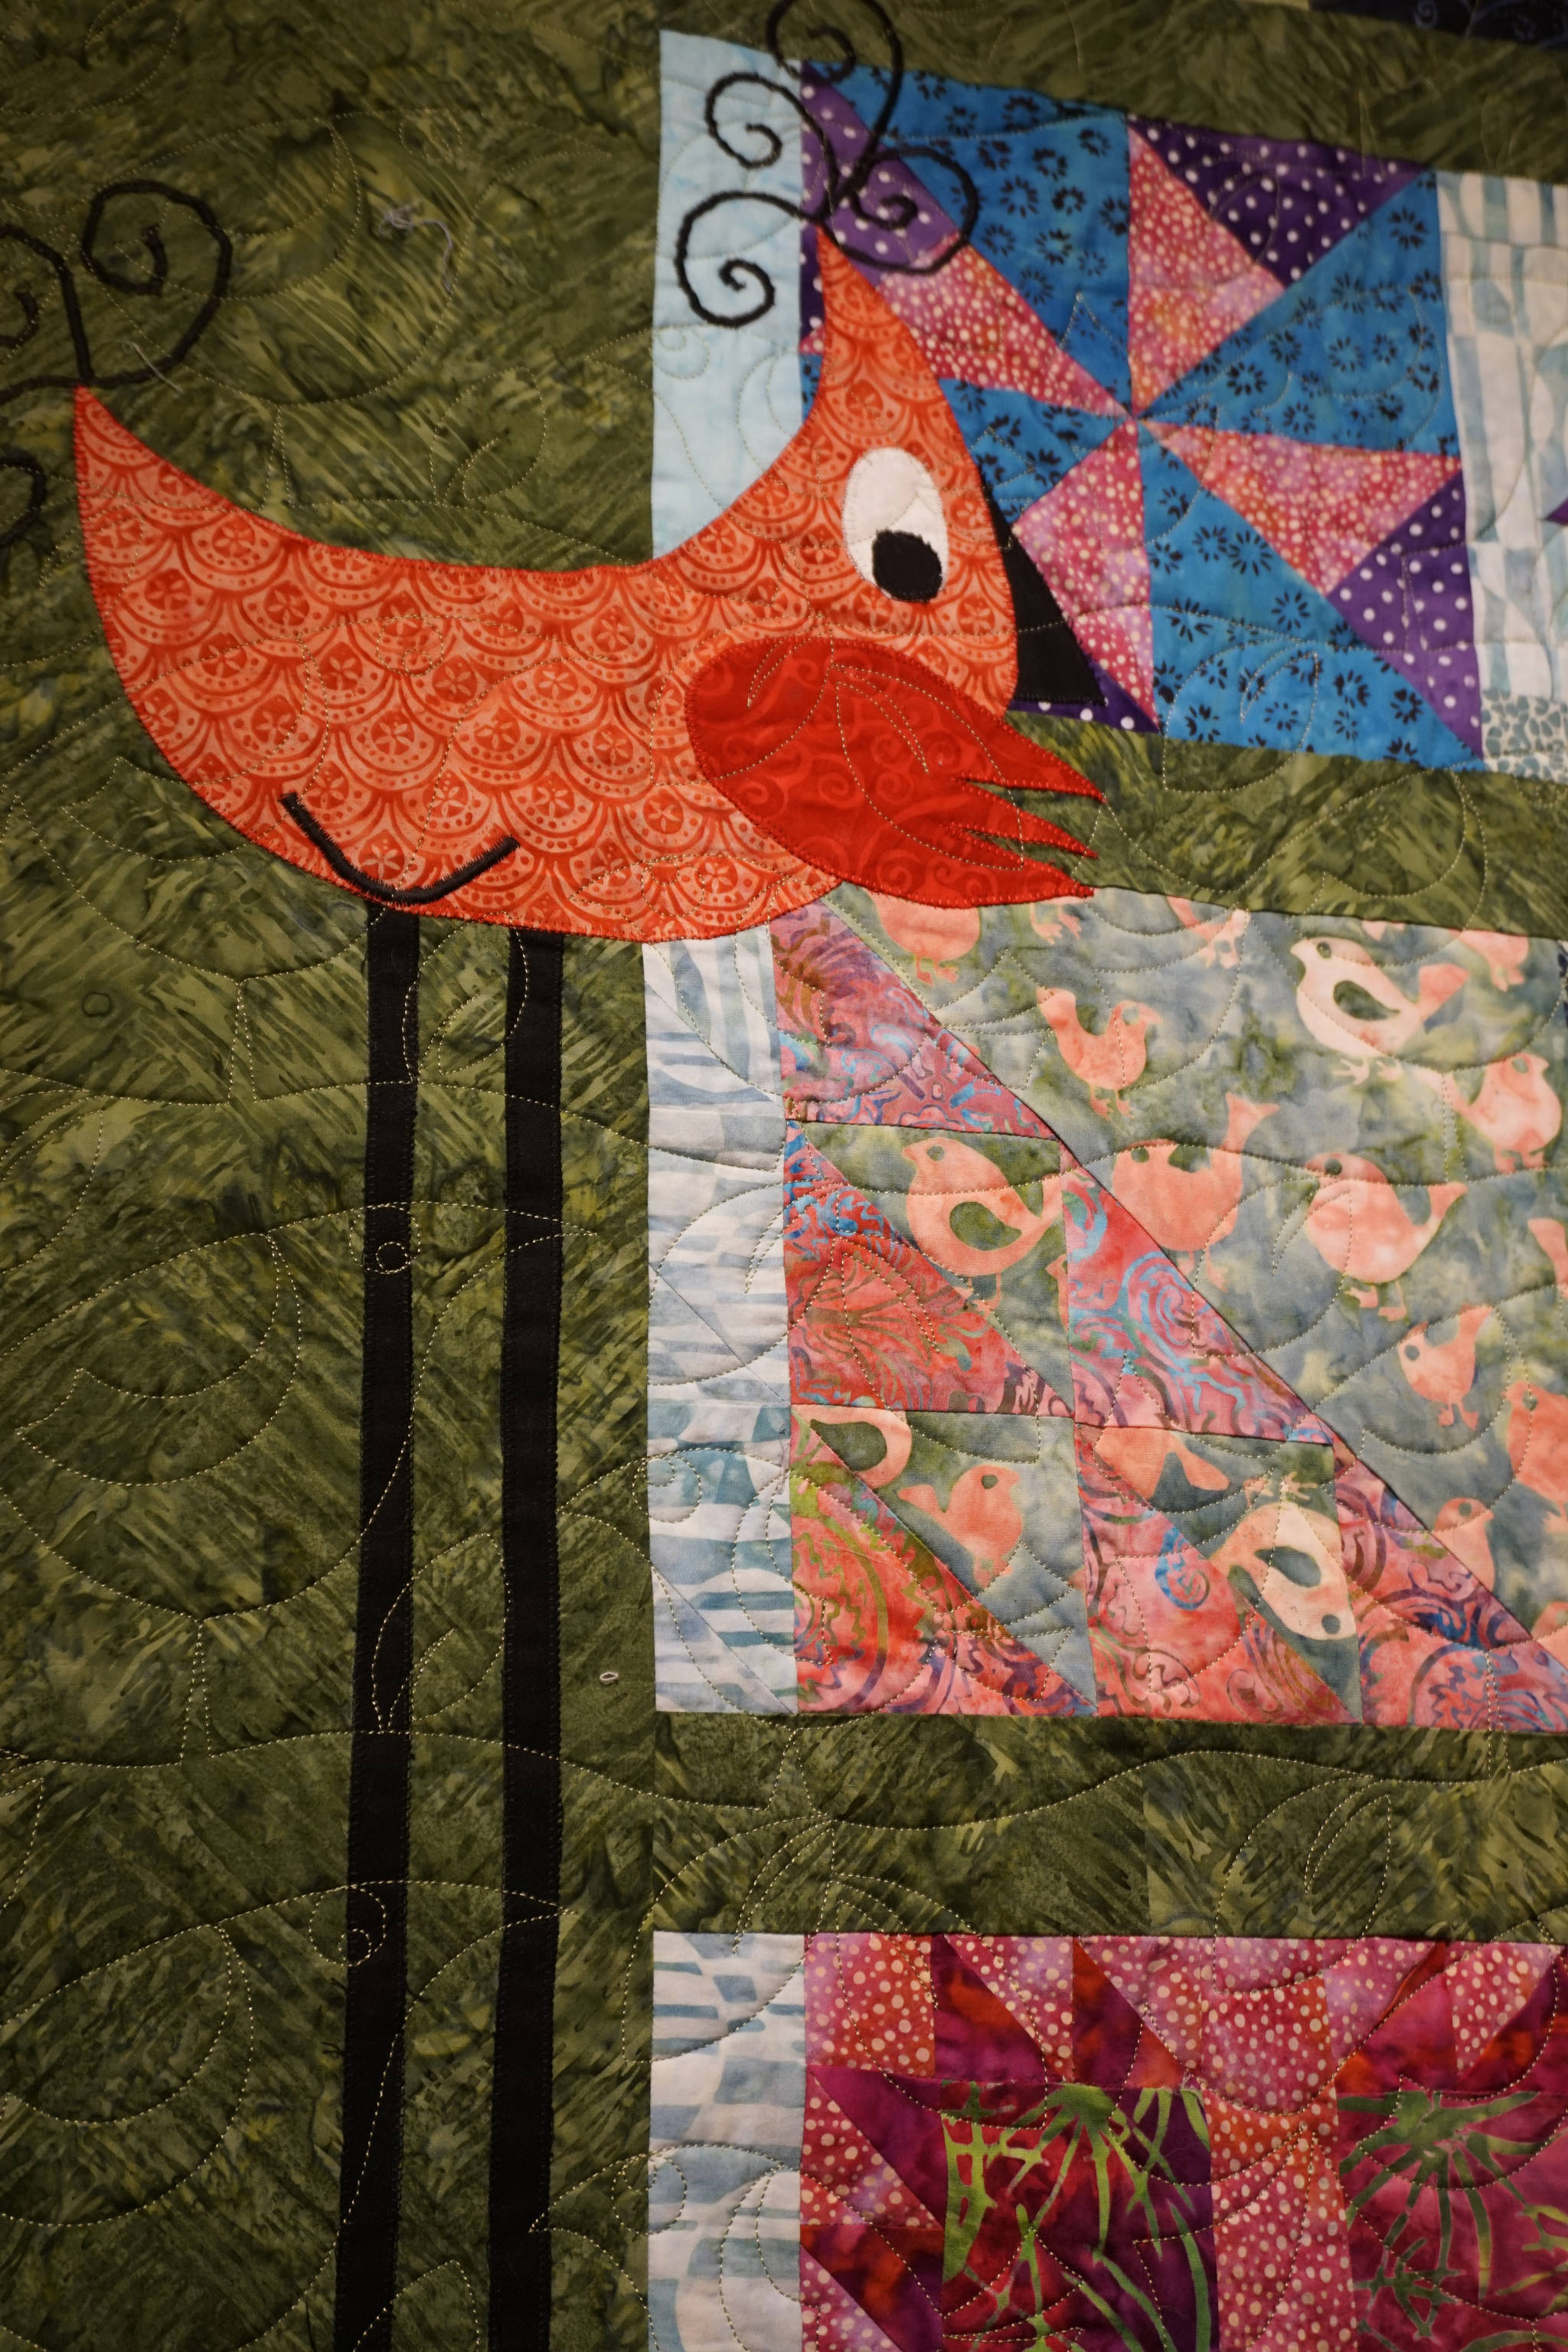 A panel by Patrice Krant from Janet Bacher’s “Birds in Flight” quilt, one of the works in the “9 Women / 9 Quilts” show that opened last Friday, Feb. 1, 2019, at the Homer Council on the Arts, in Homer, Alaska. (Photo by Michael Armstrong/Homer News)